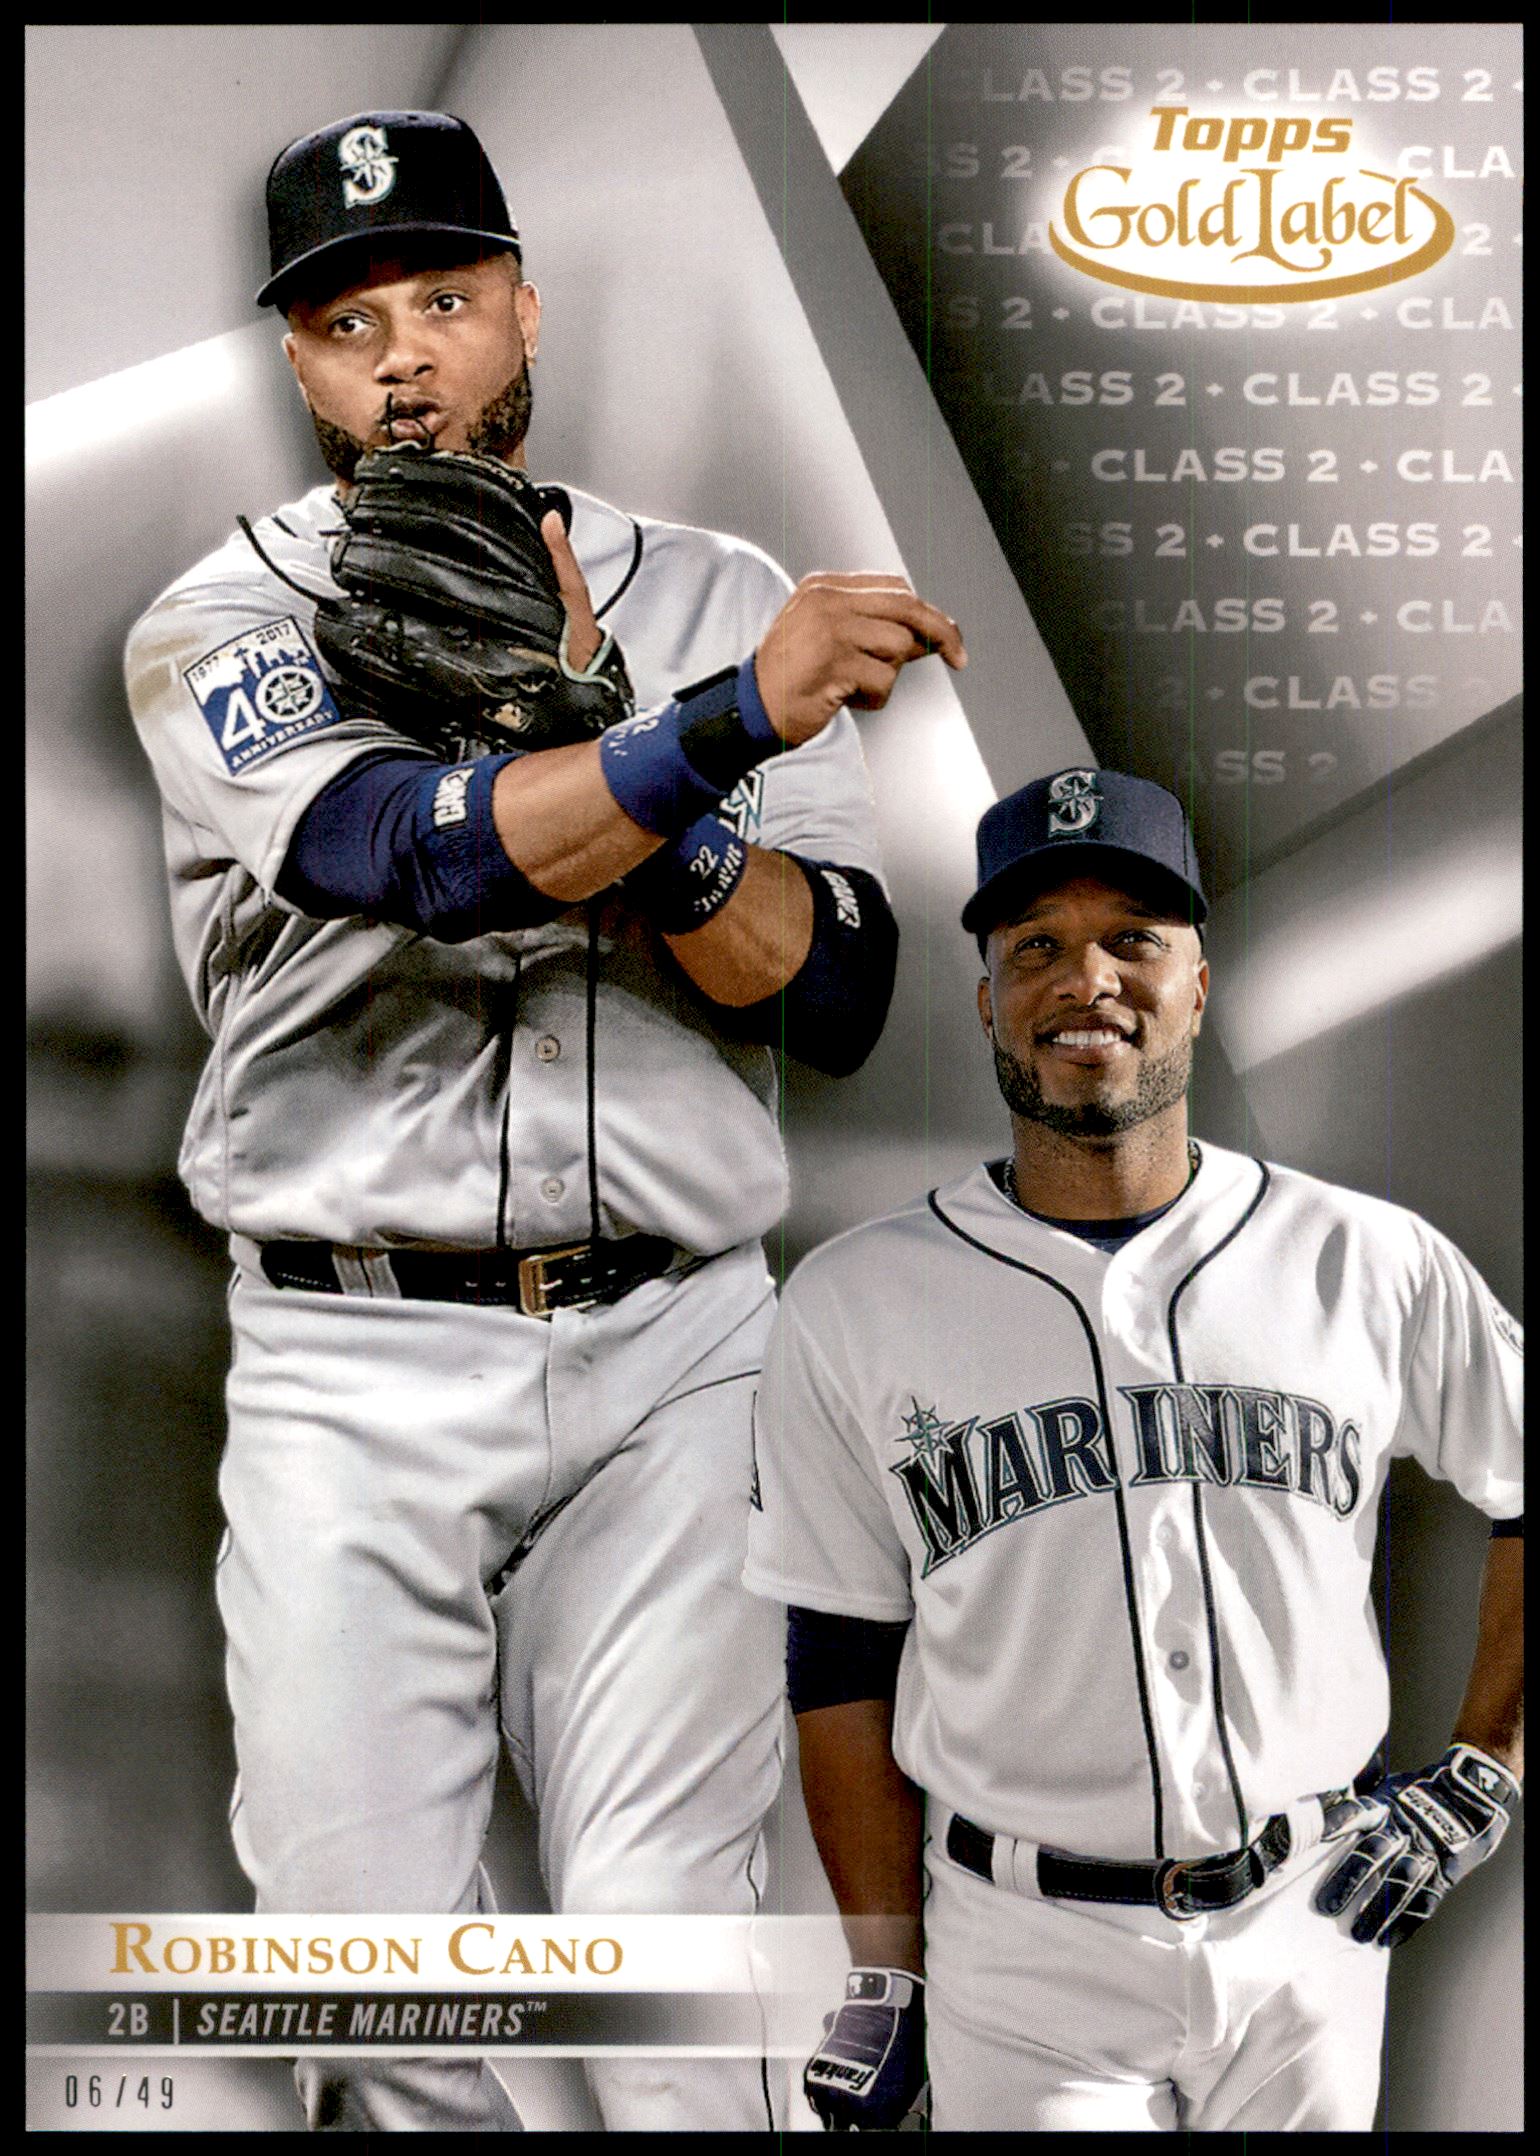 2018 Topps Gold Label 5x7 Class 2 #87 Robinson Cano